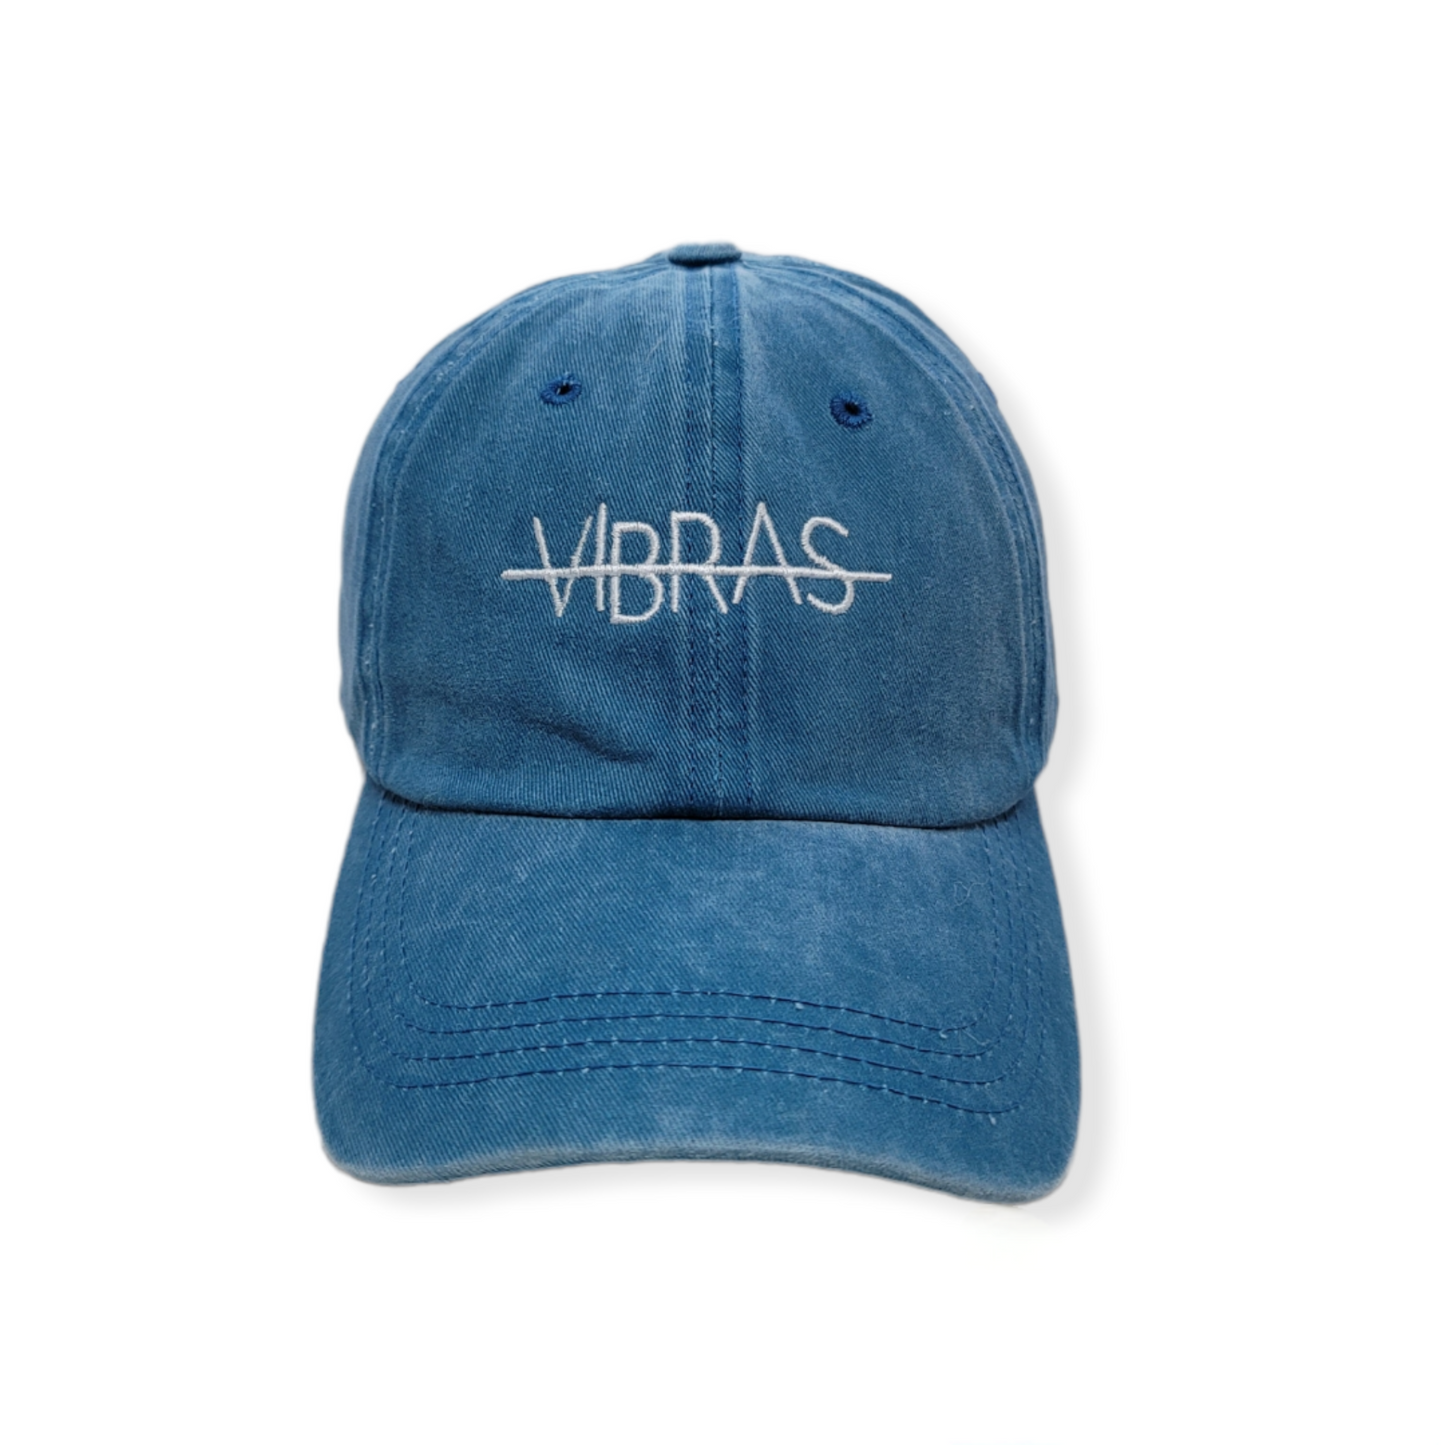 PHOTO OF DEEP BLUE GREY BASEBALL CAP FROM VIBRAS ACTIVEWEAR ON A WHITE BACKGROUND.